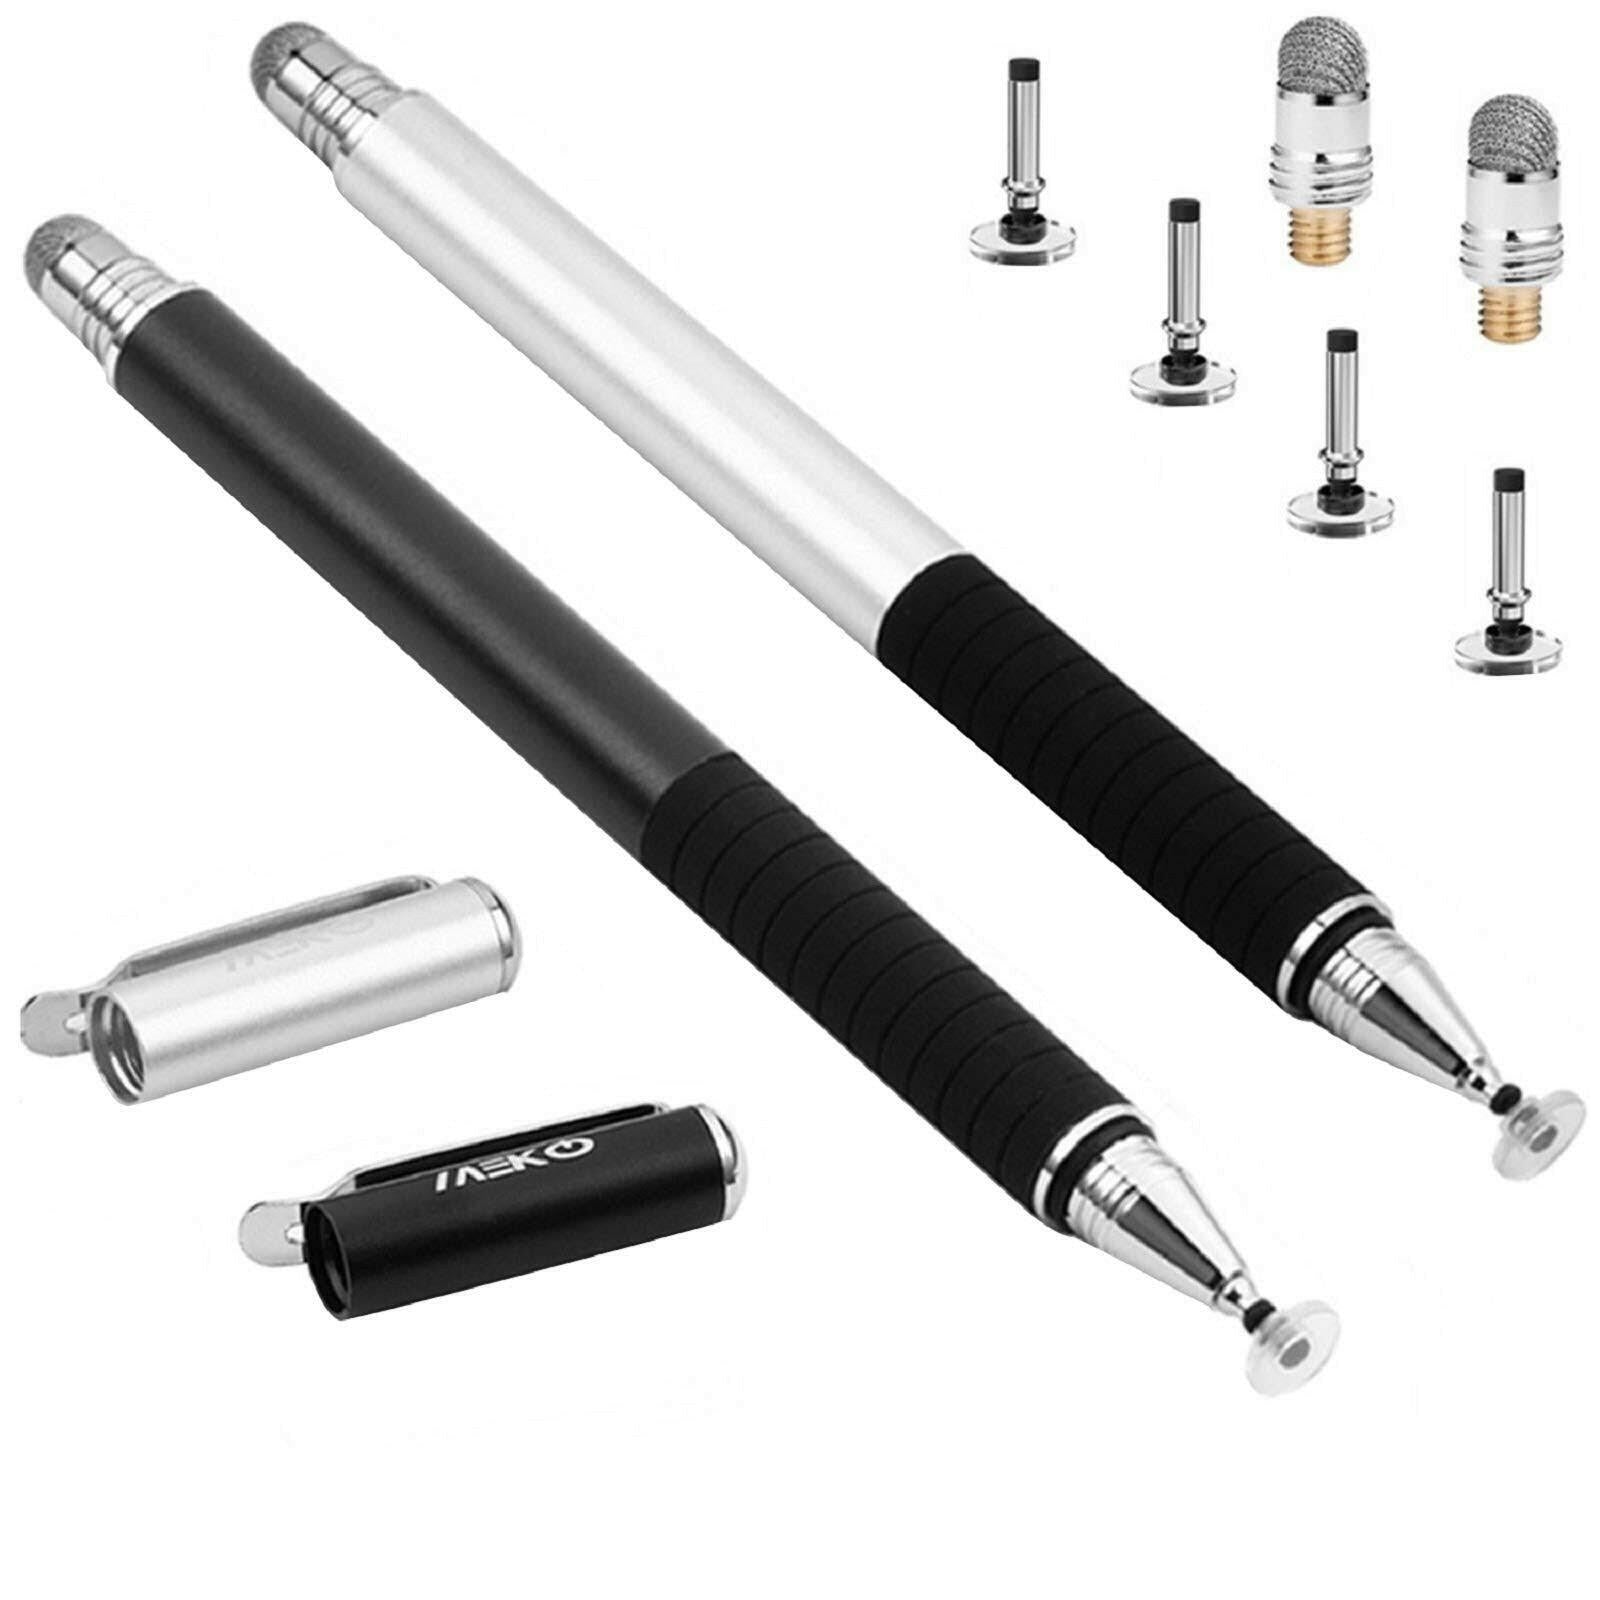 MEKO 2-in-1 Stylus Precision Disc Styli Touch Screen Pen with 3 Replaceable Tips